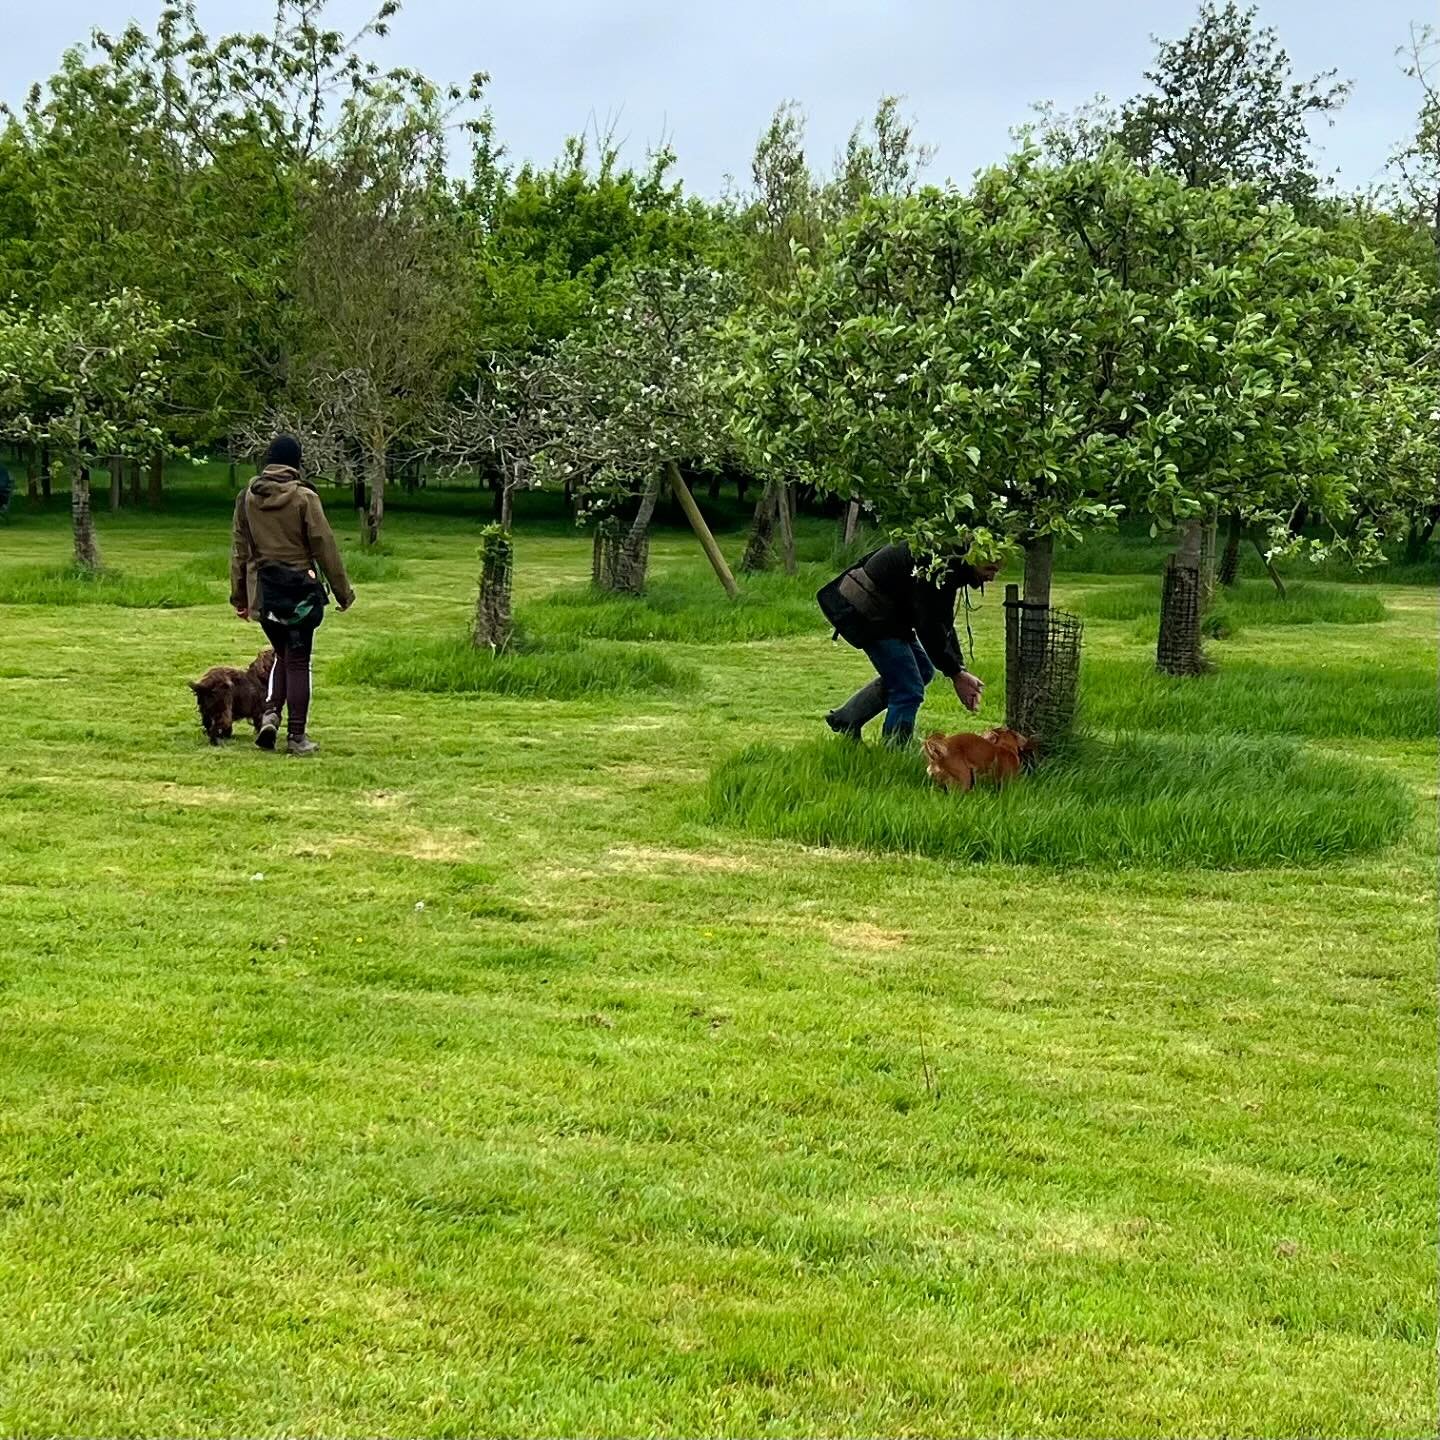 Four Spaniels on the field so what better exercise than practicing a little hunt up. The long grass under the trees is ideal to teach the dogs to hold an area. The dogs were in their element and nicely under control while all four were told to hunt d